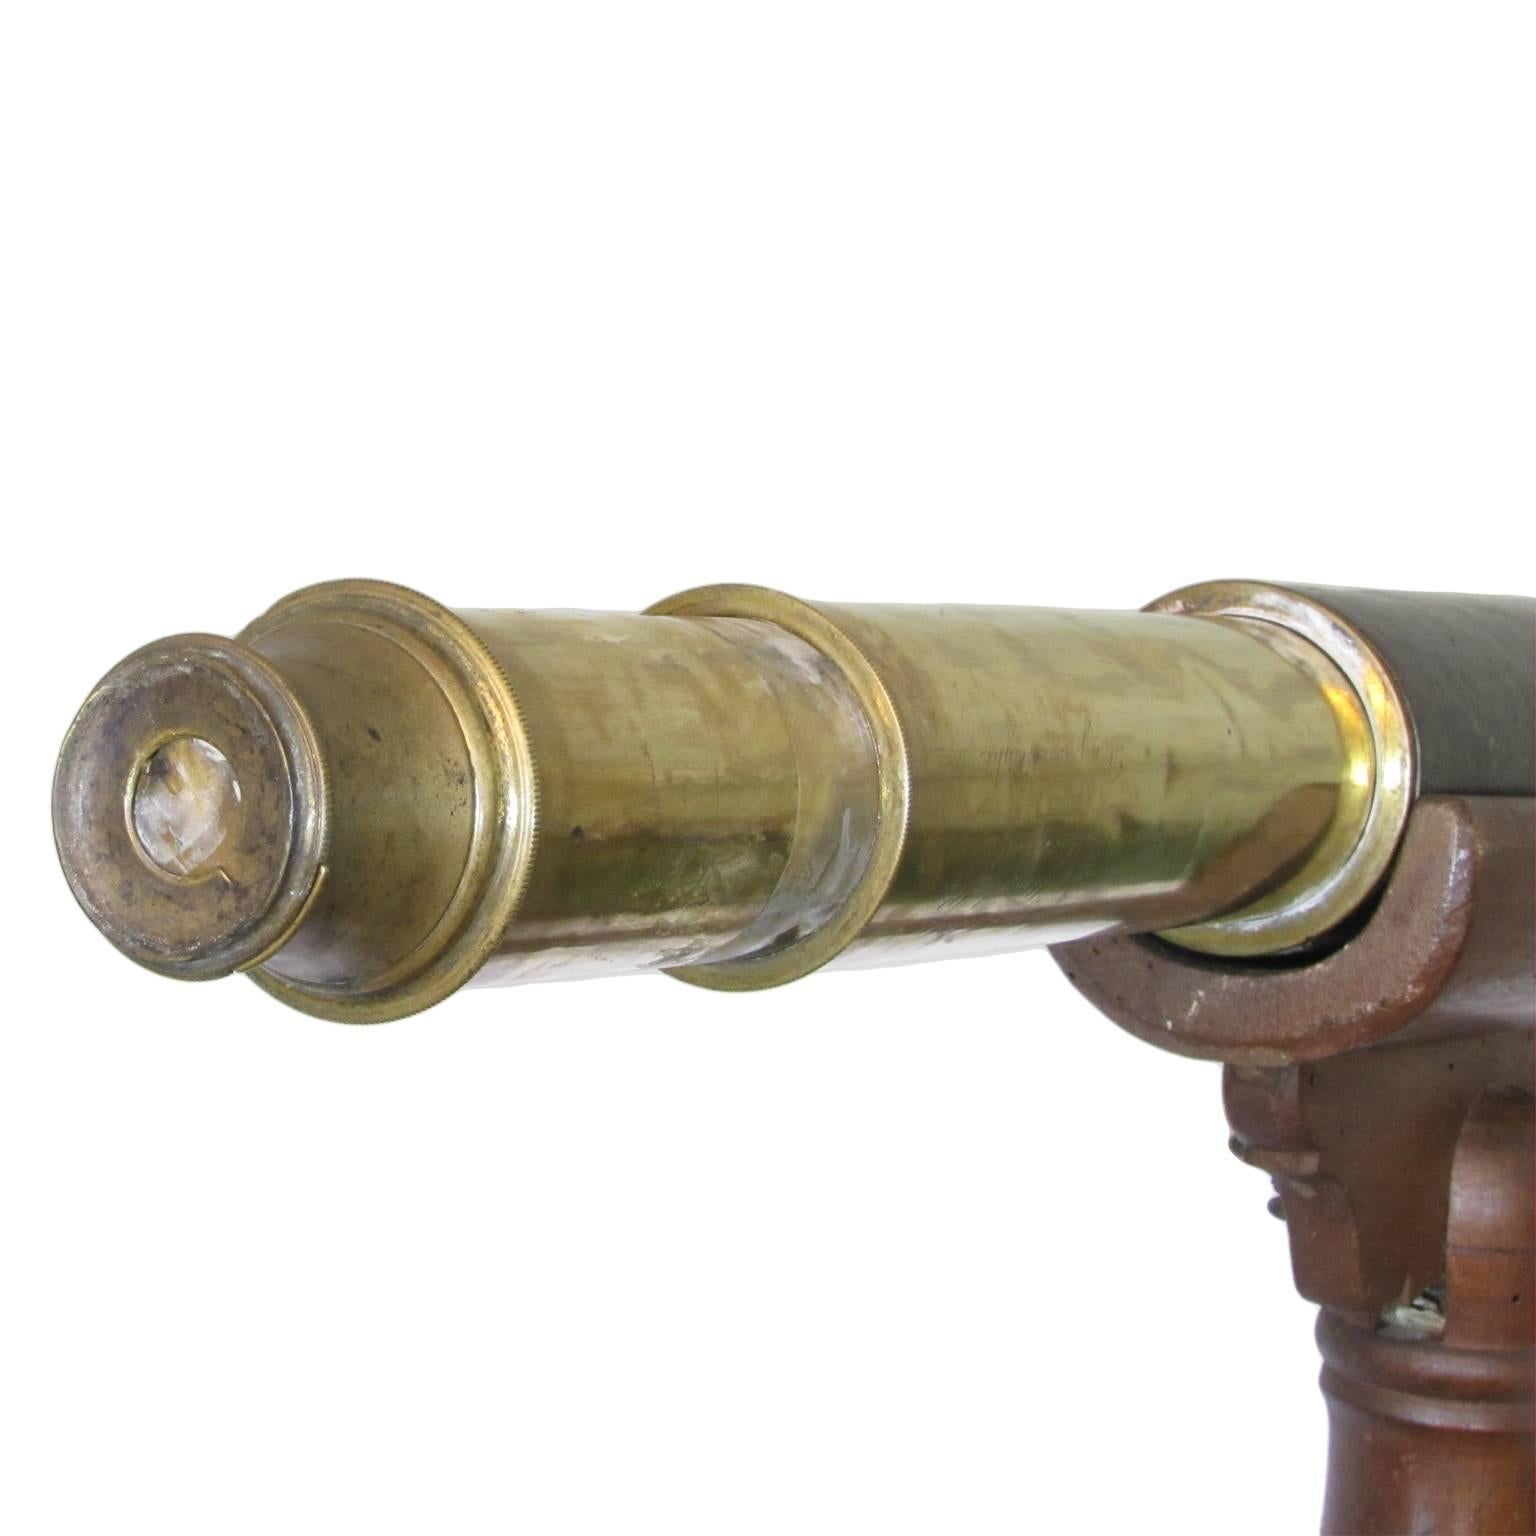 A large 19th century astronomical telescope on its original wooden tripod, in solid walnut. This beautiful piece features a brass and leather body and was manufactured and signed by Thomas Roberts, Liverpool, England. 
Inscription: 'Thomas Roberts,